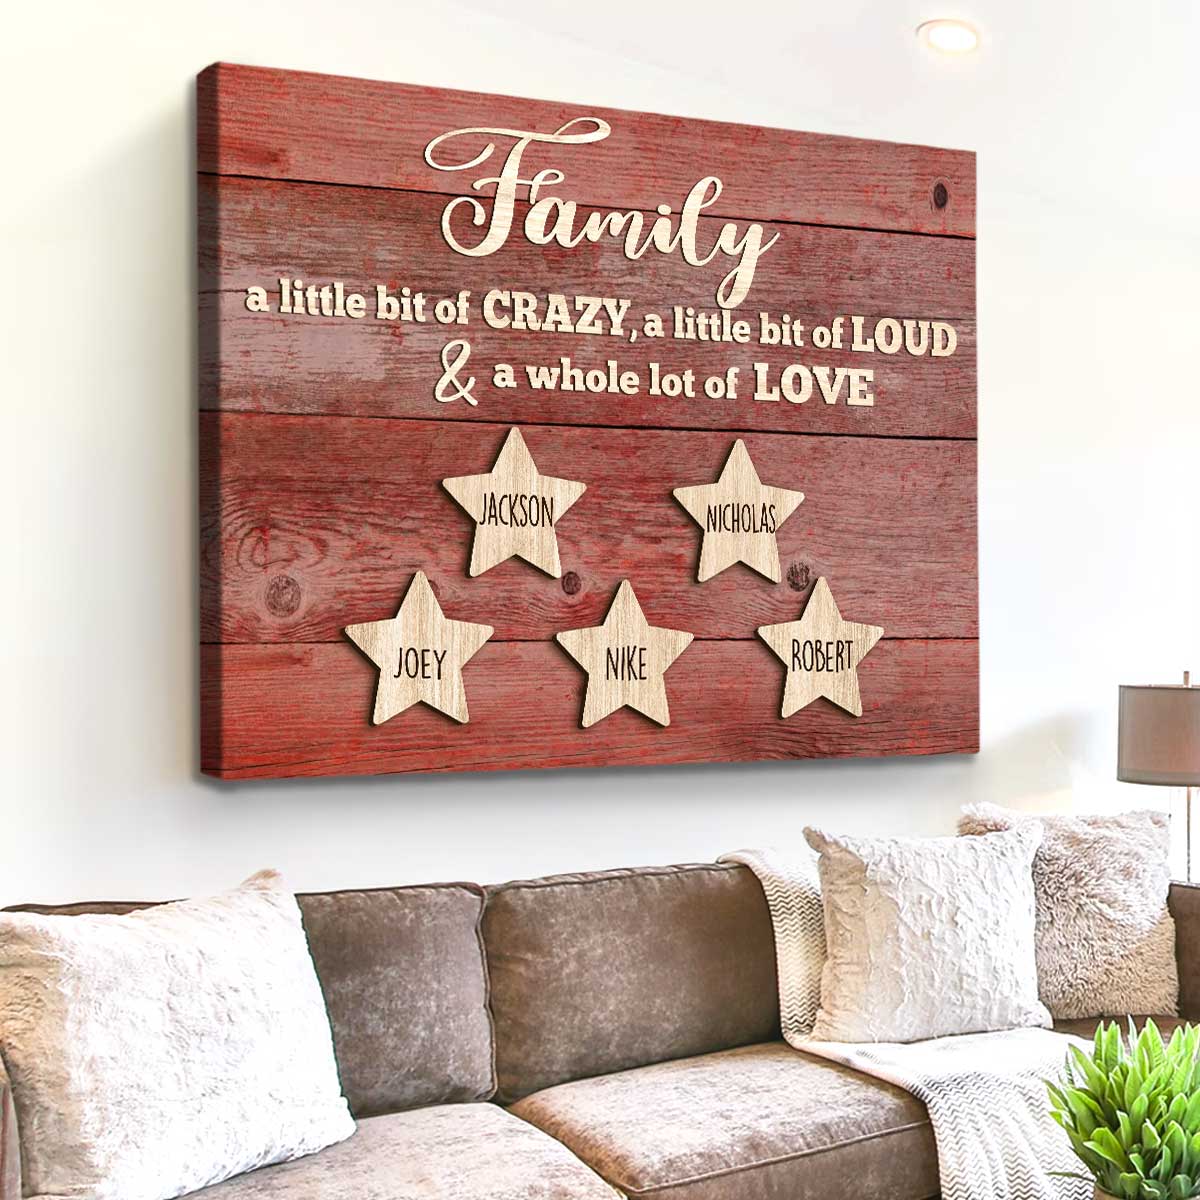 Unique Gifts For The Whole Family At One Site